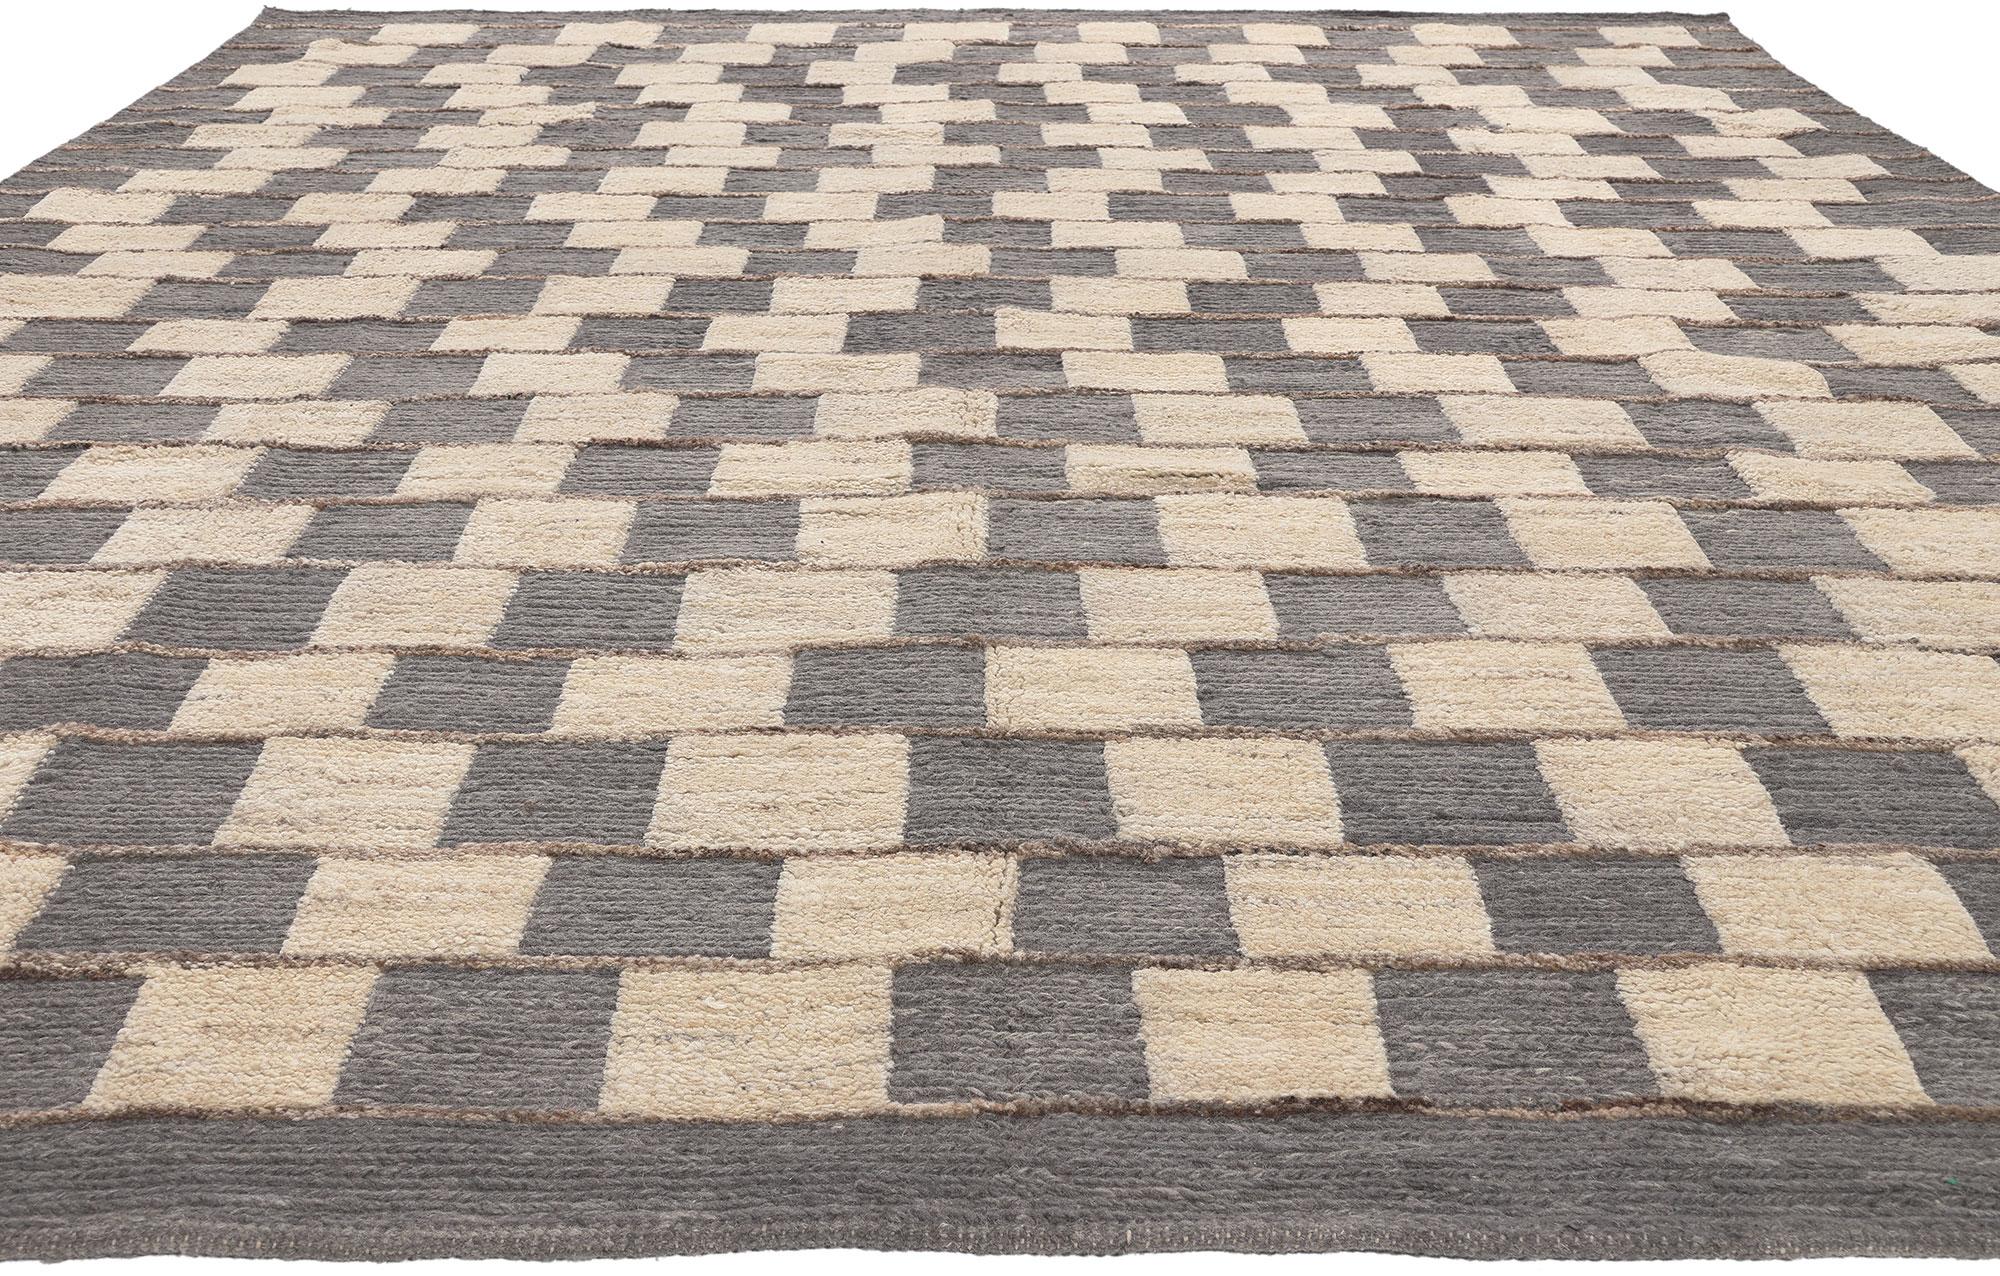 Organic Brutalist Moroccan Textured Rug Neutral Earth-Tones In New Condition For Sale In Dallas, TX